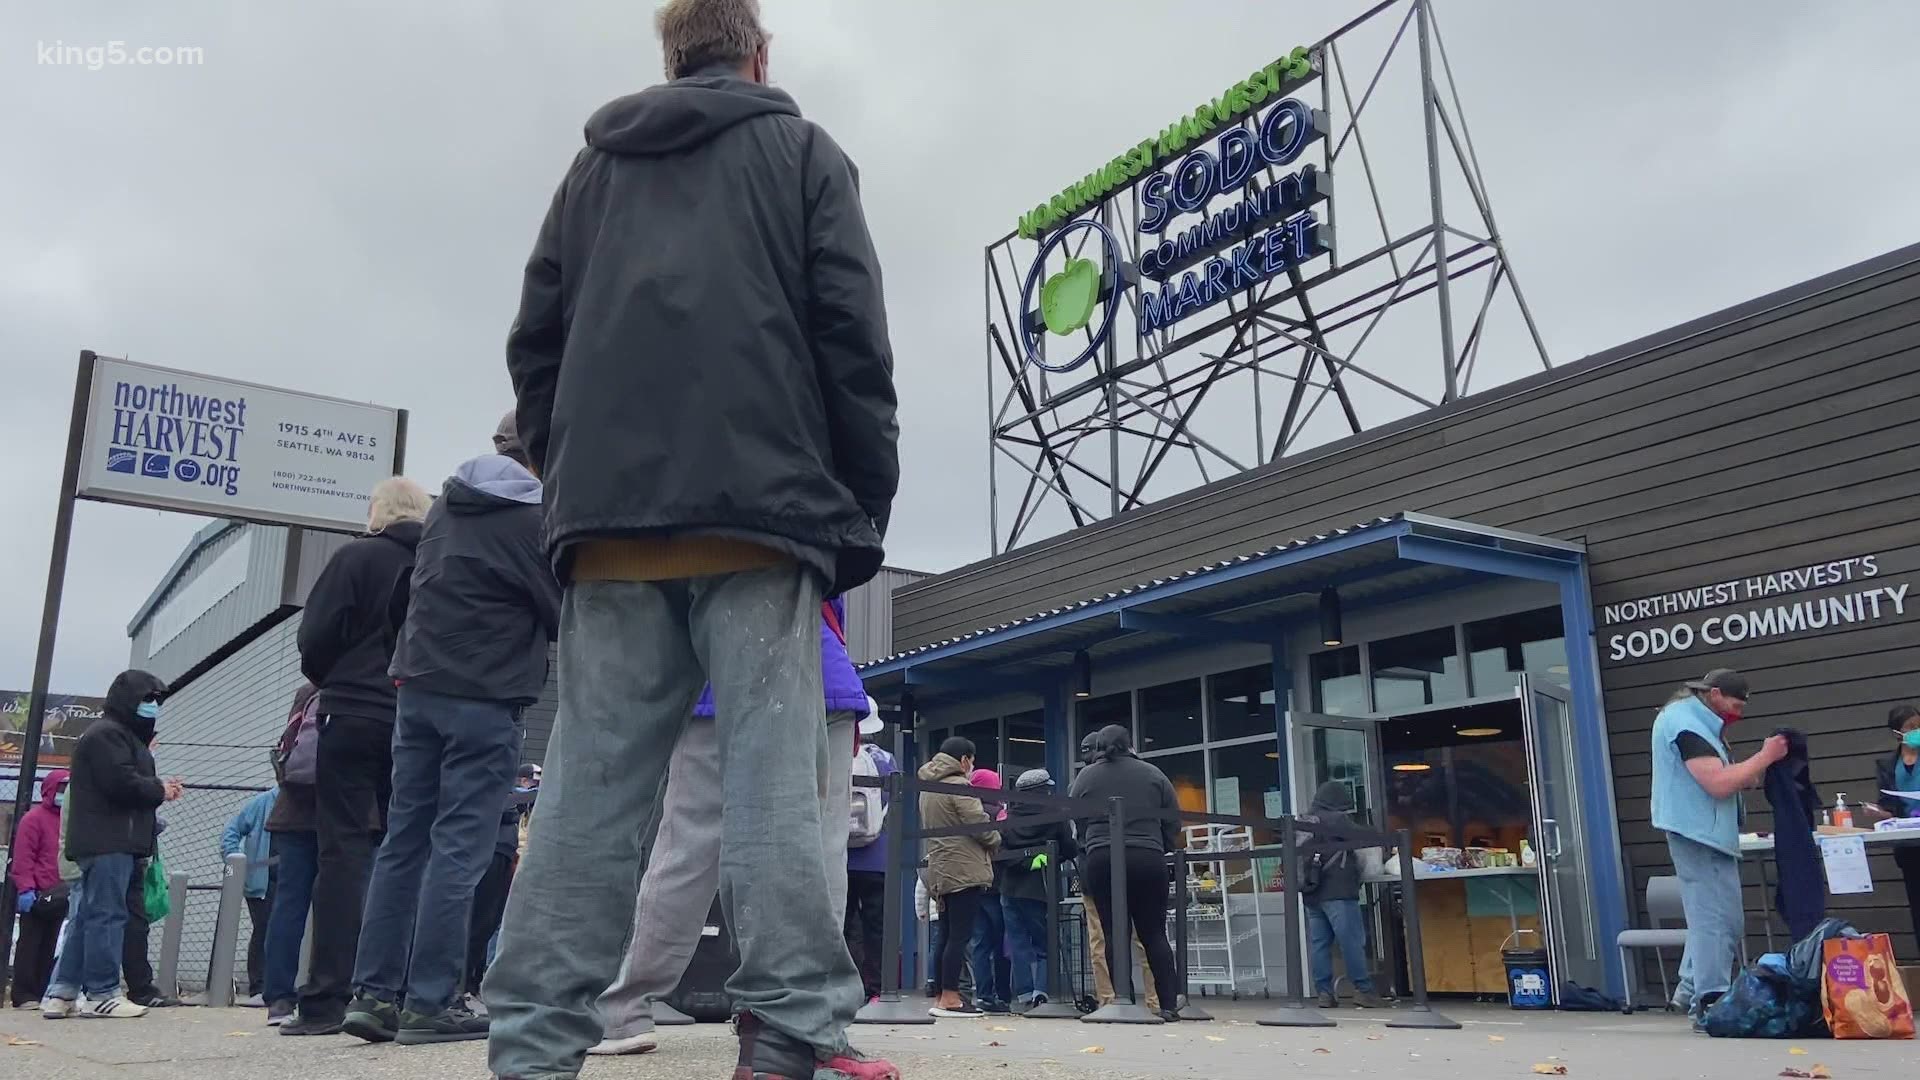 Northwest Harvest provides for the neighborhood in its SoDo Community Market, a free grocery store for people in need.